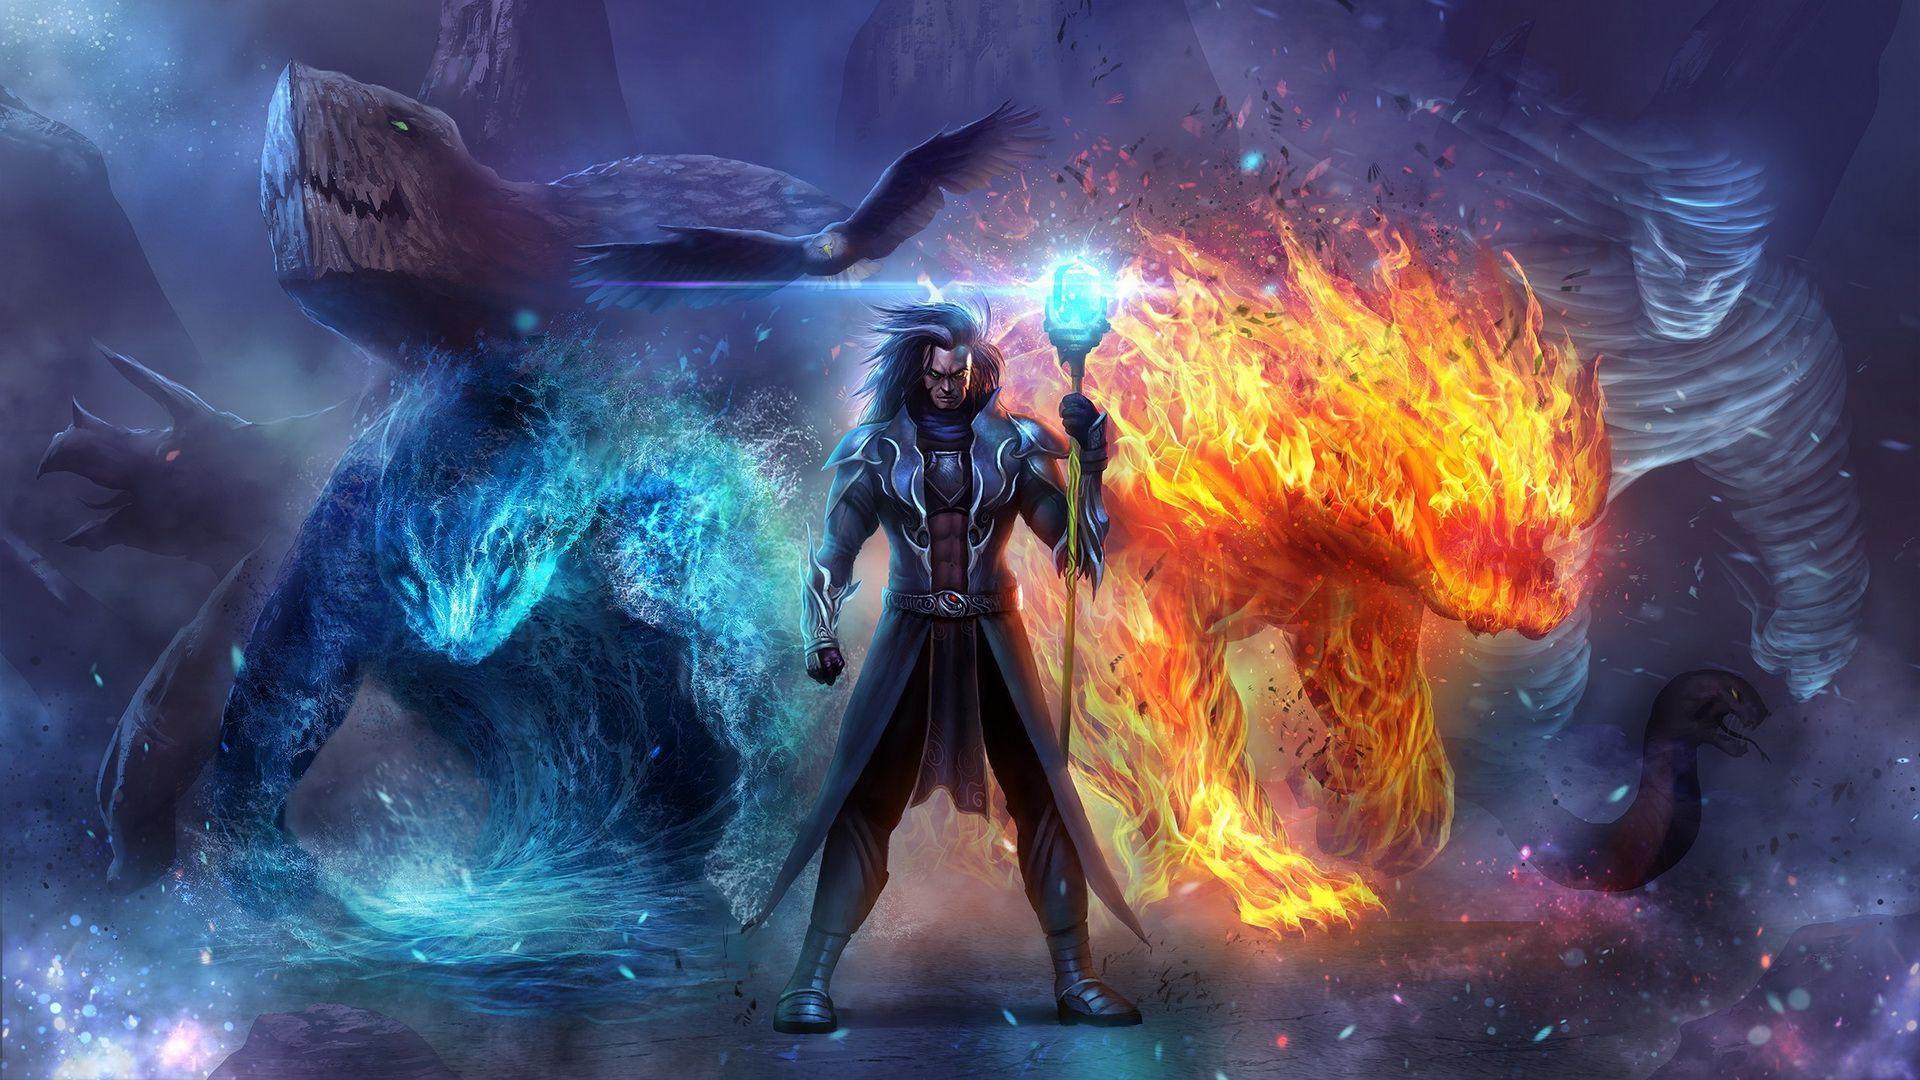 Hd Wizard In Ice And Fire Wallpaper And Ice Wizard